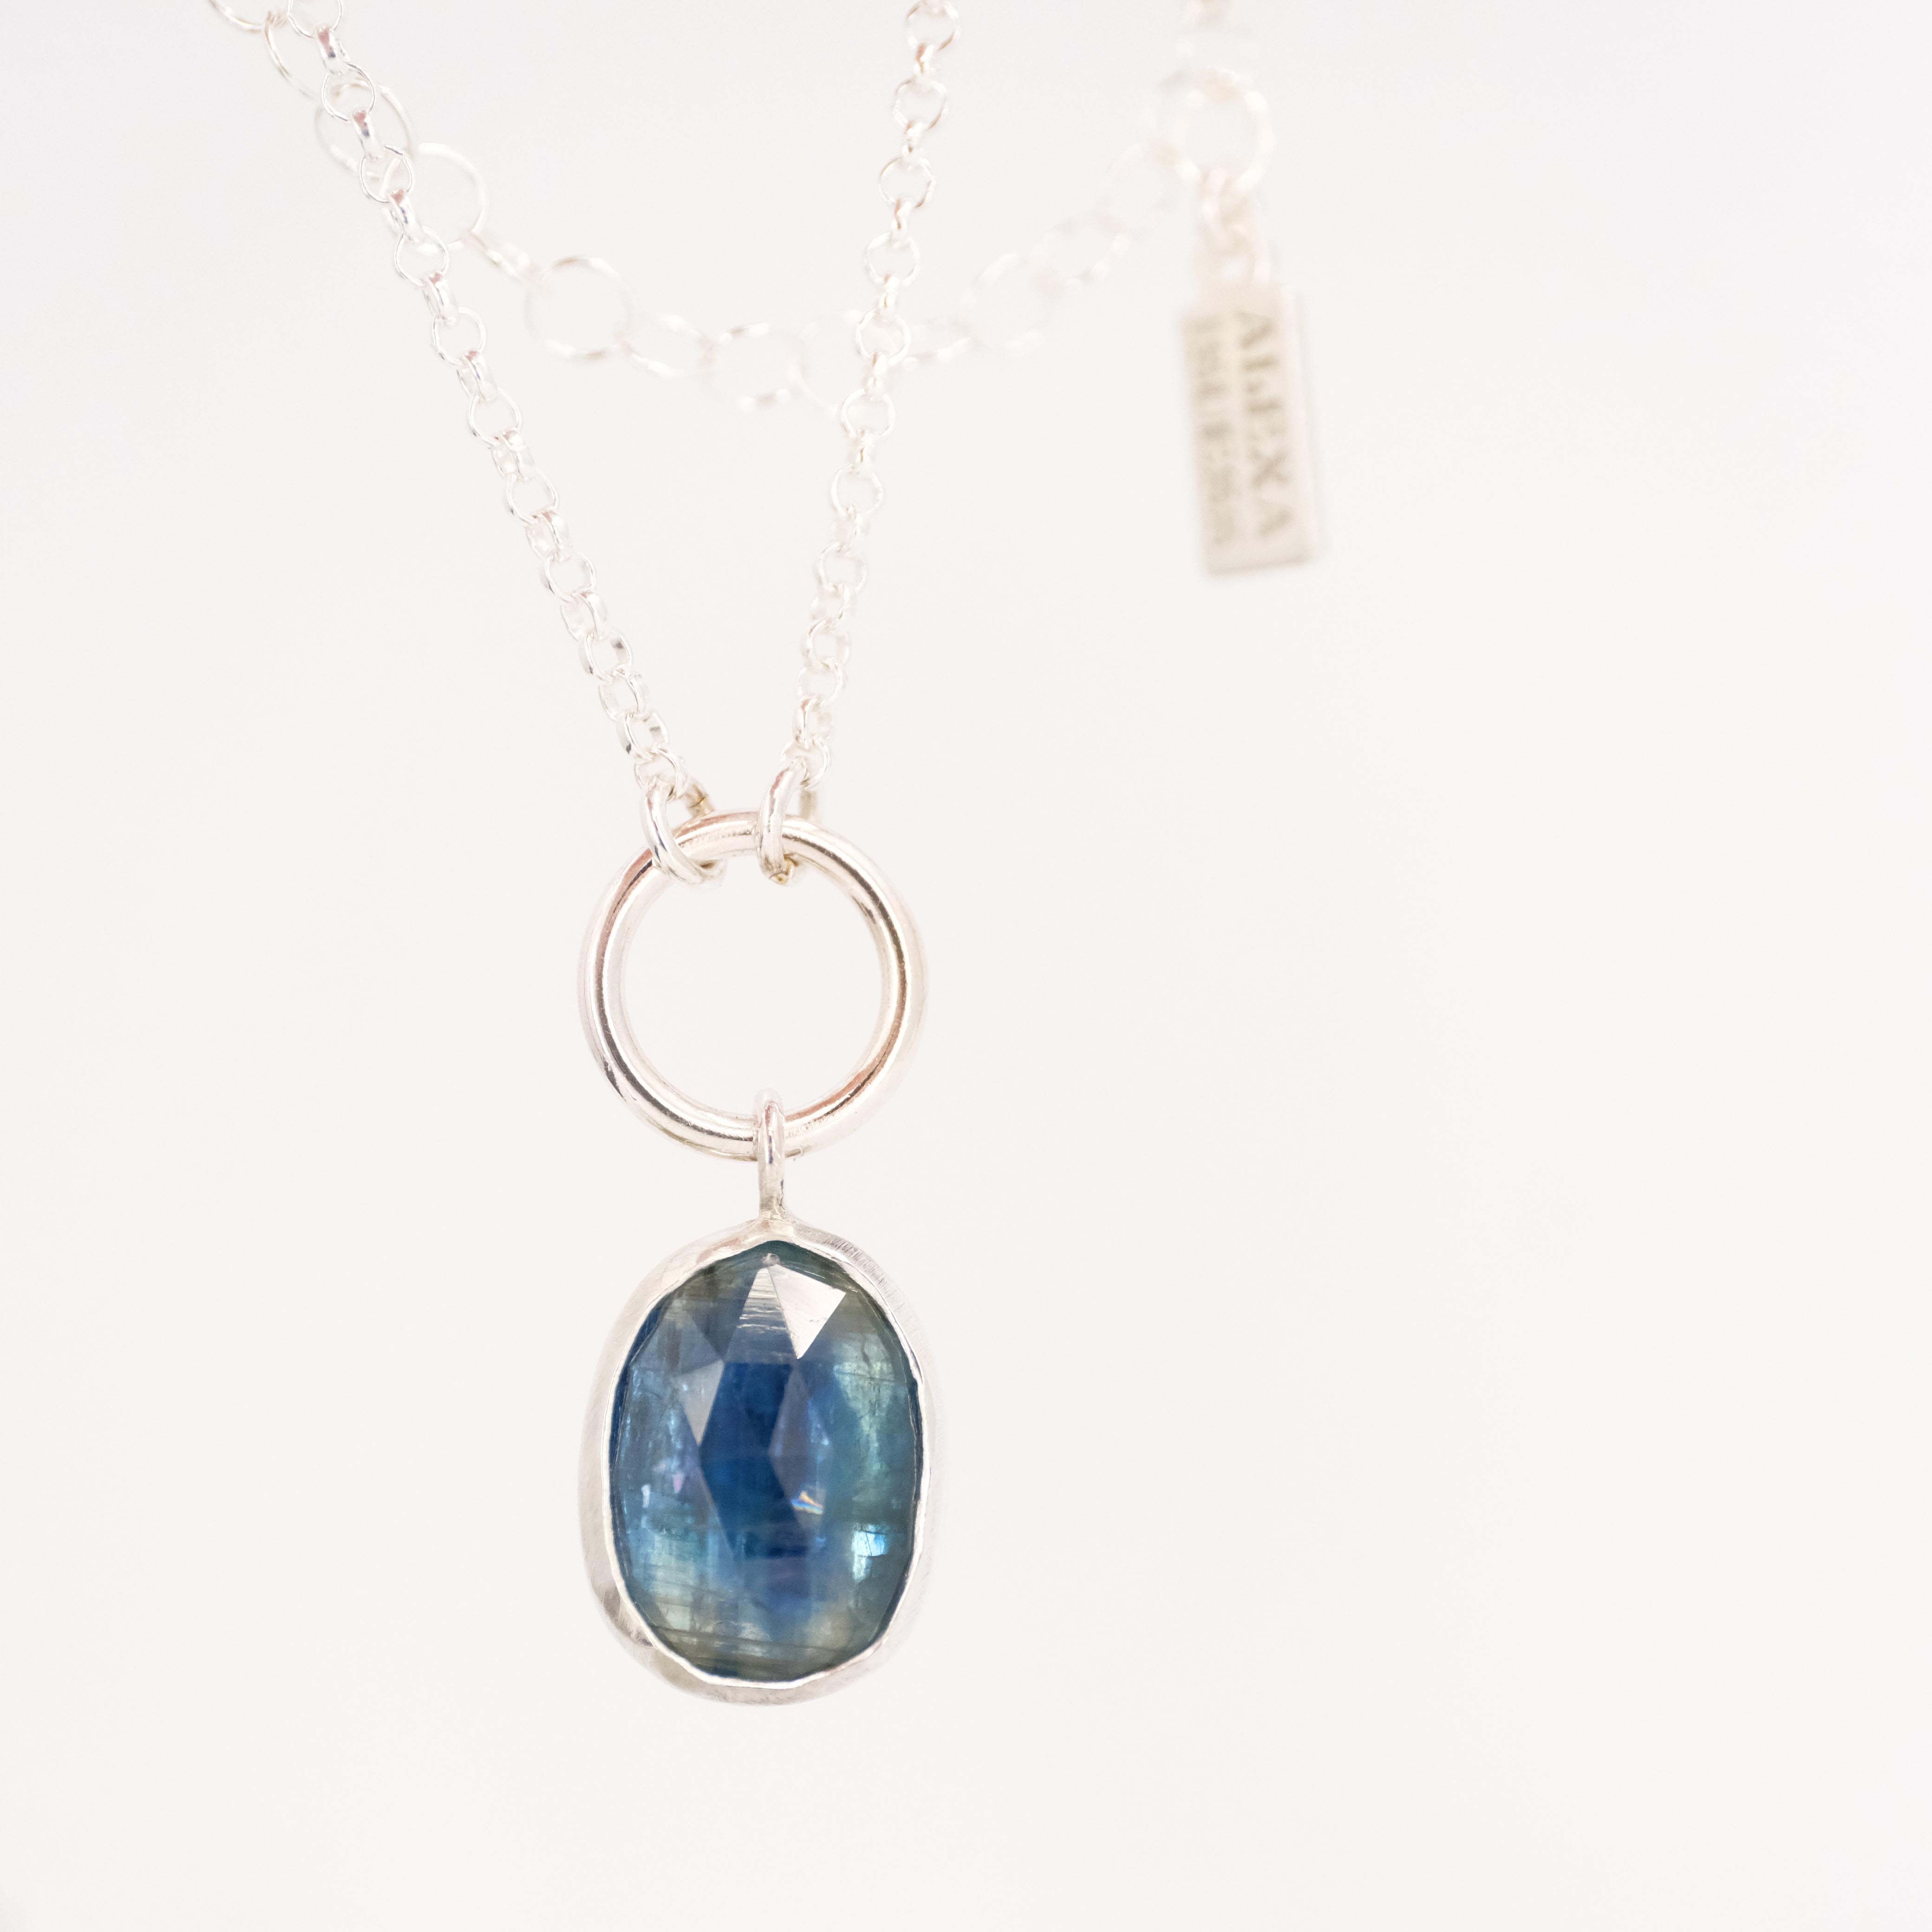 Kyanite Riptide Necklace - One of a Kind